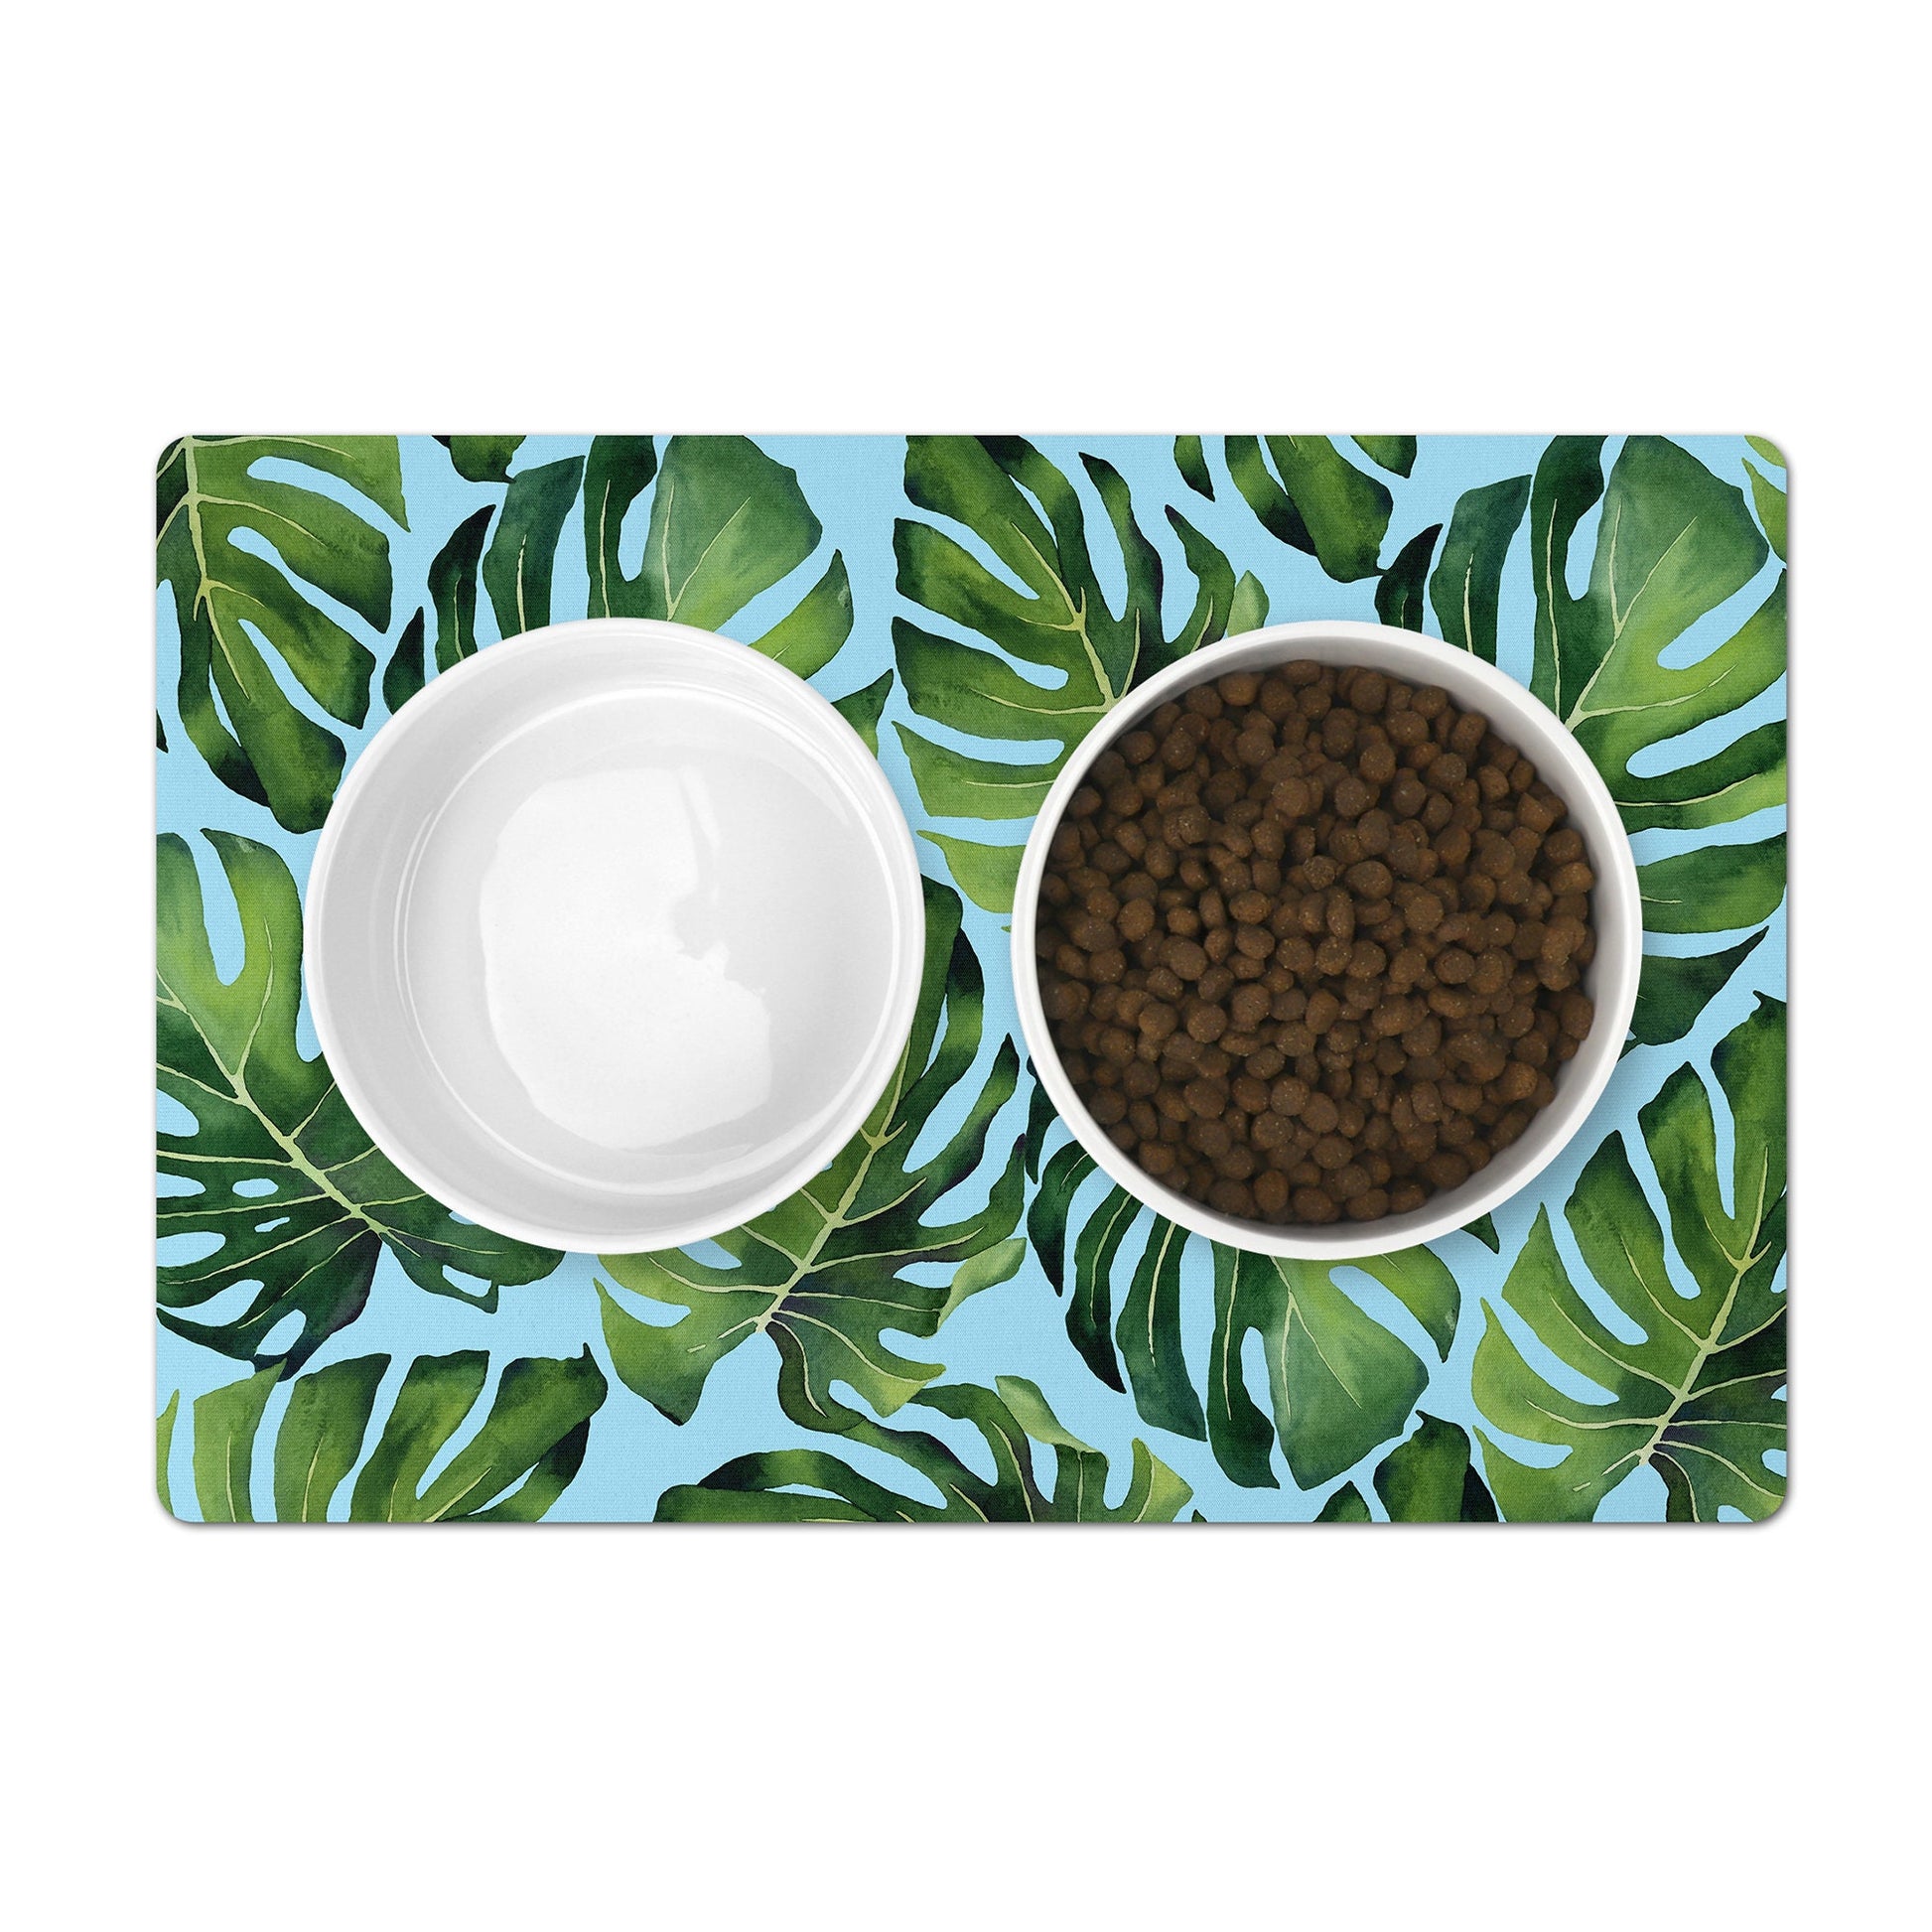 Pet food mat in aqua with green monstera leaves print to place under pet bowls.